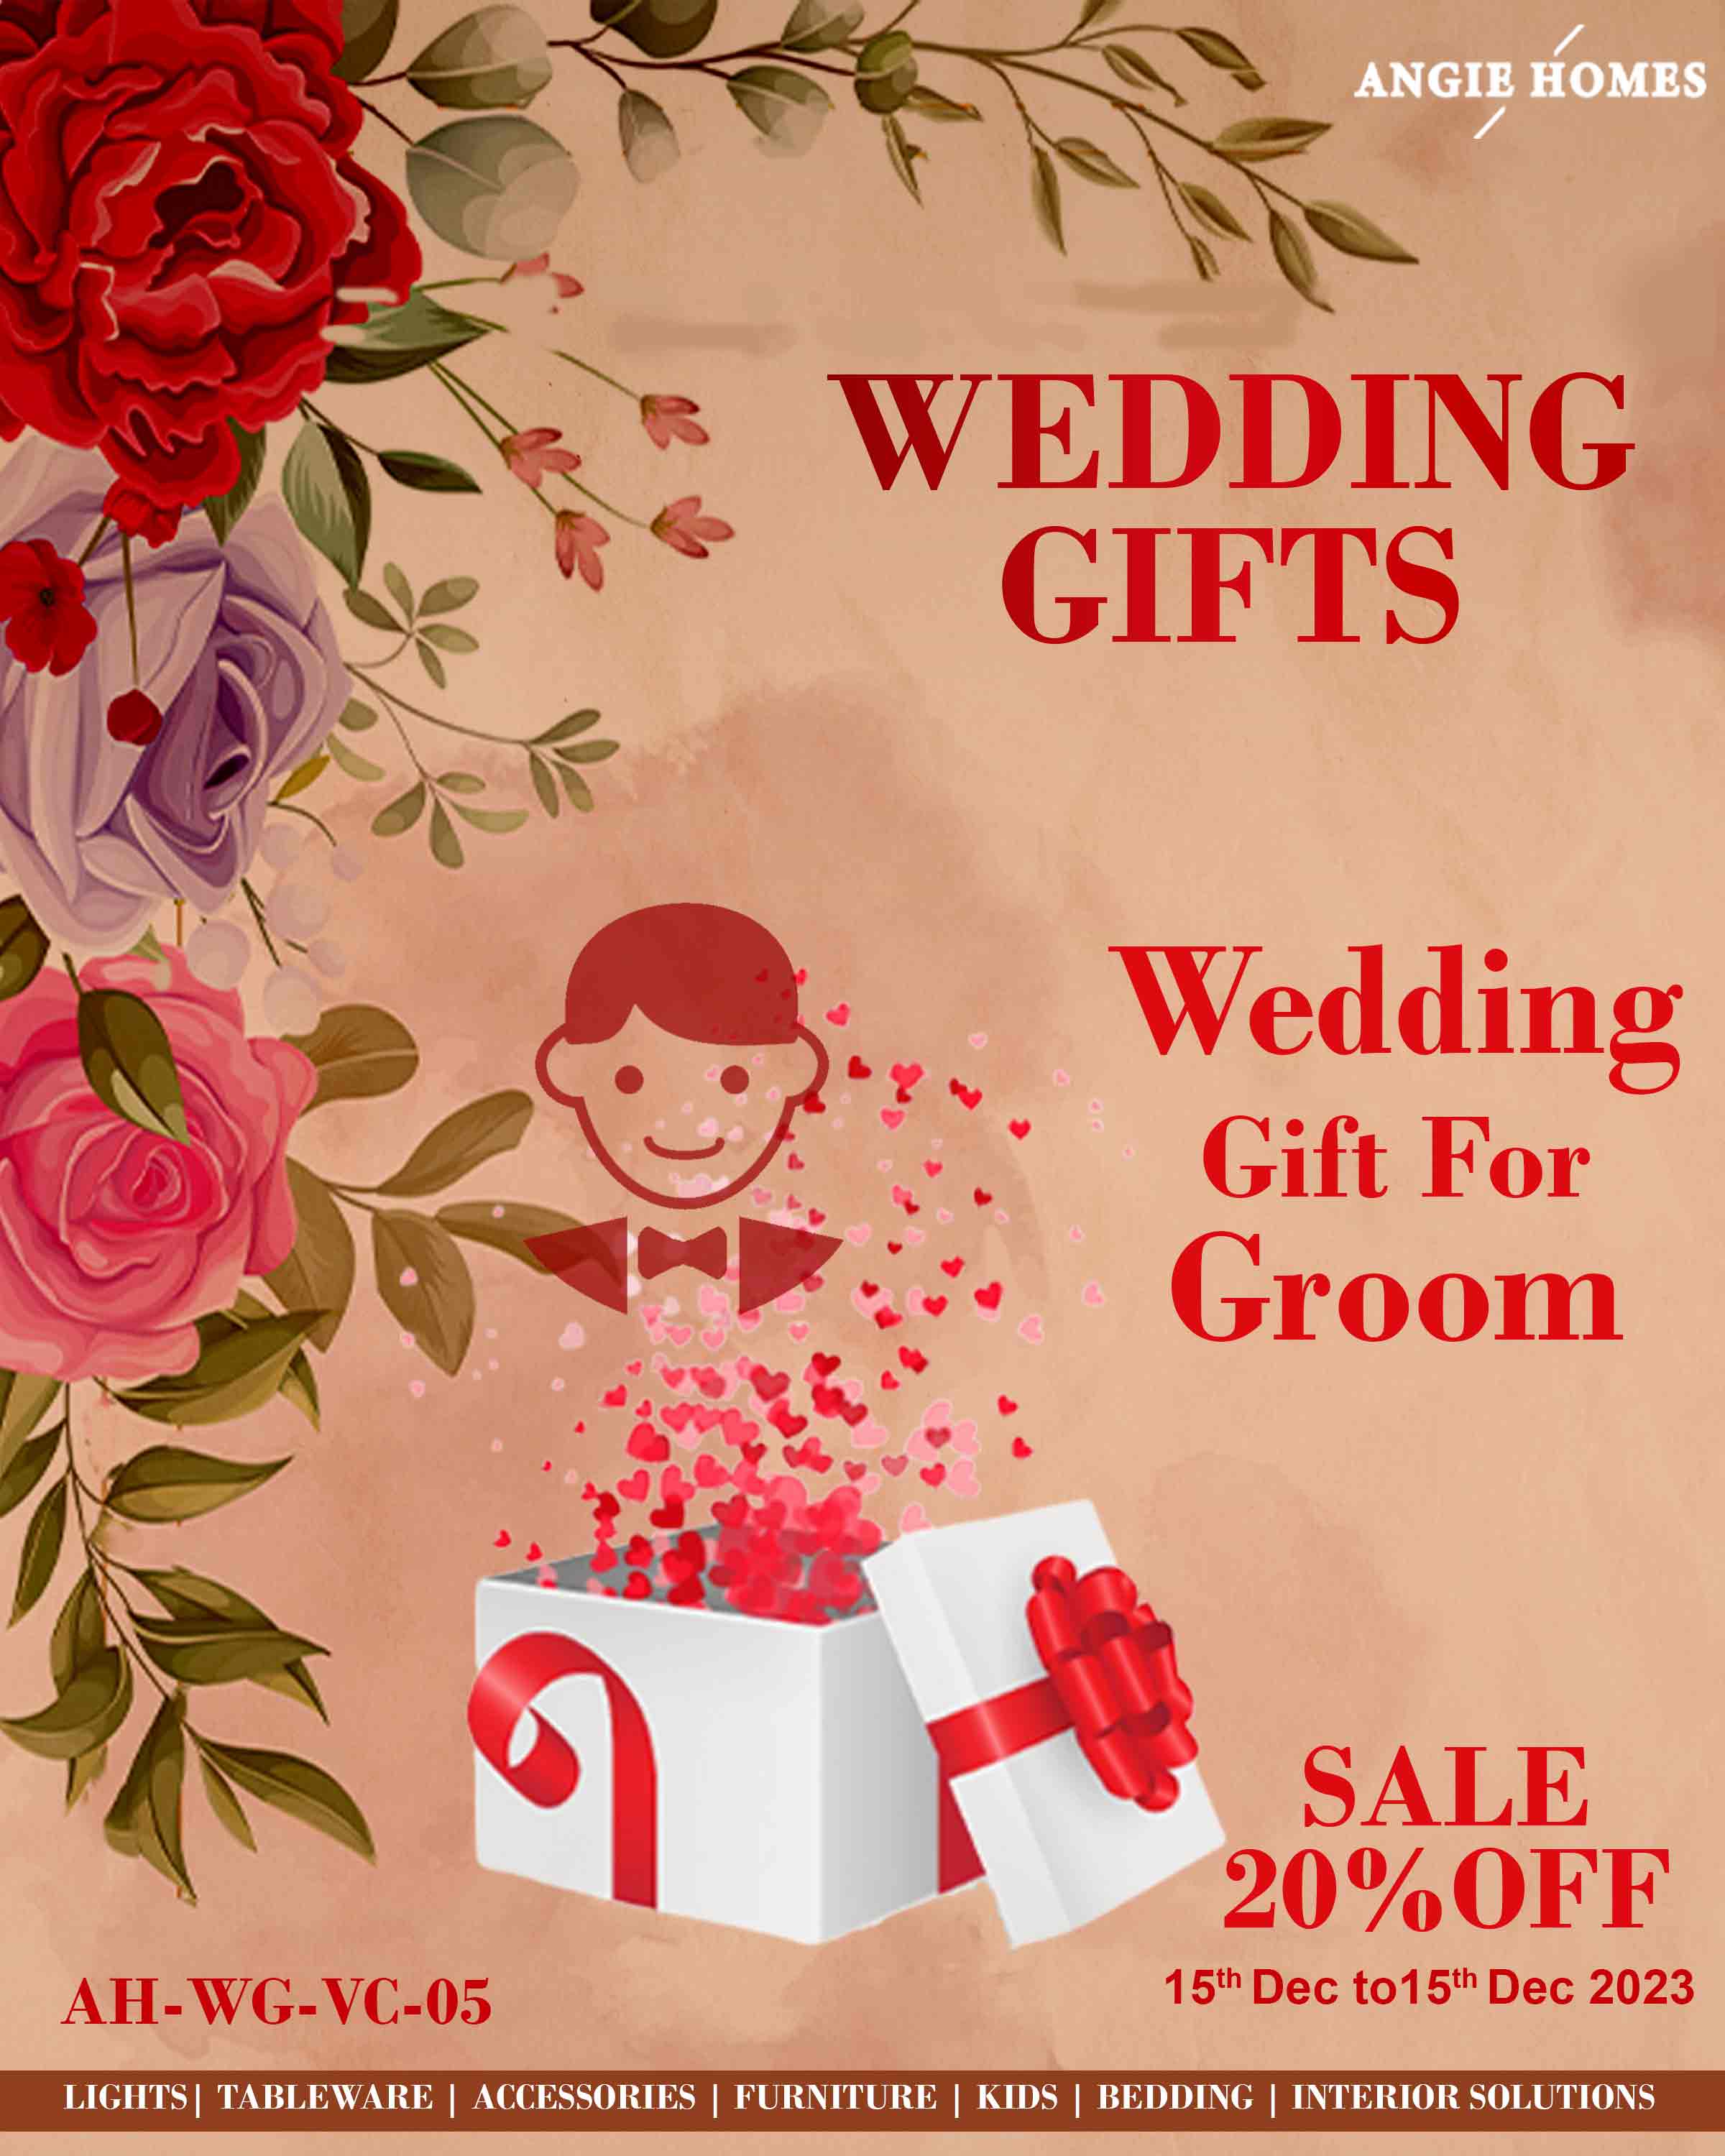 WEDDING GIFTS FOR GROOM | MARRIAGE GIFT VOUCHER | GIFTTING CARD FOR NEWLY WEDS ANGIE HOMES